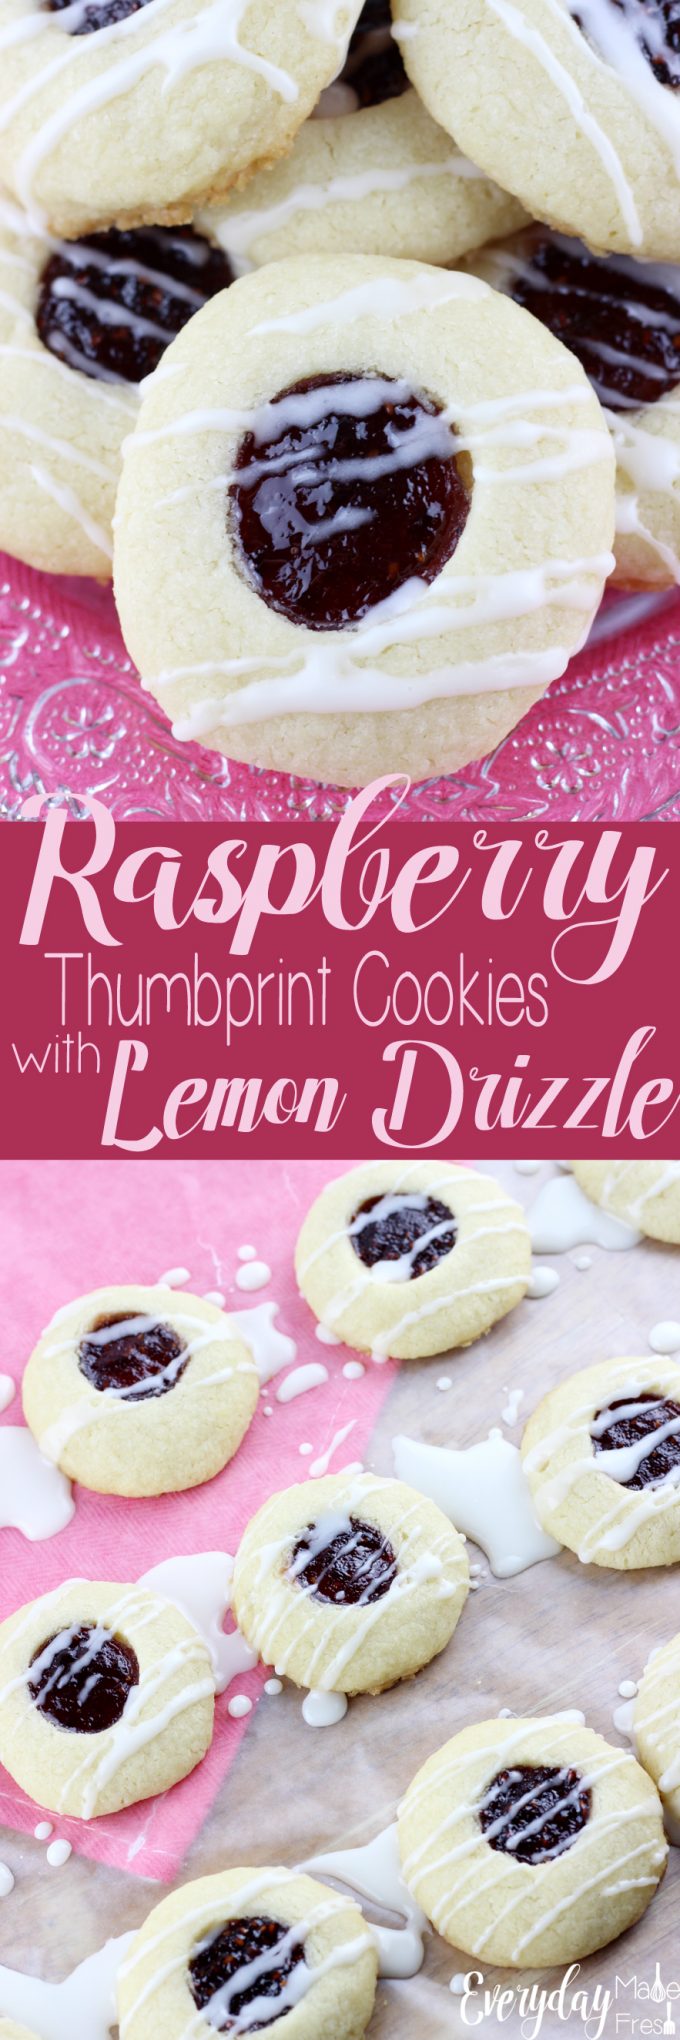 Buttery and soft, sweet and tart, these cookies have it all! These Raspberry Thumbprint Cookies with Lemon Drizzle are simple to make and perfect for any occasion! | EverydayMadeFresh.com